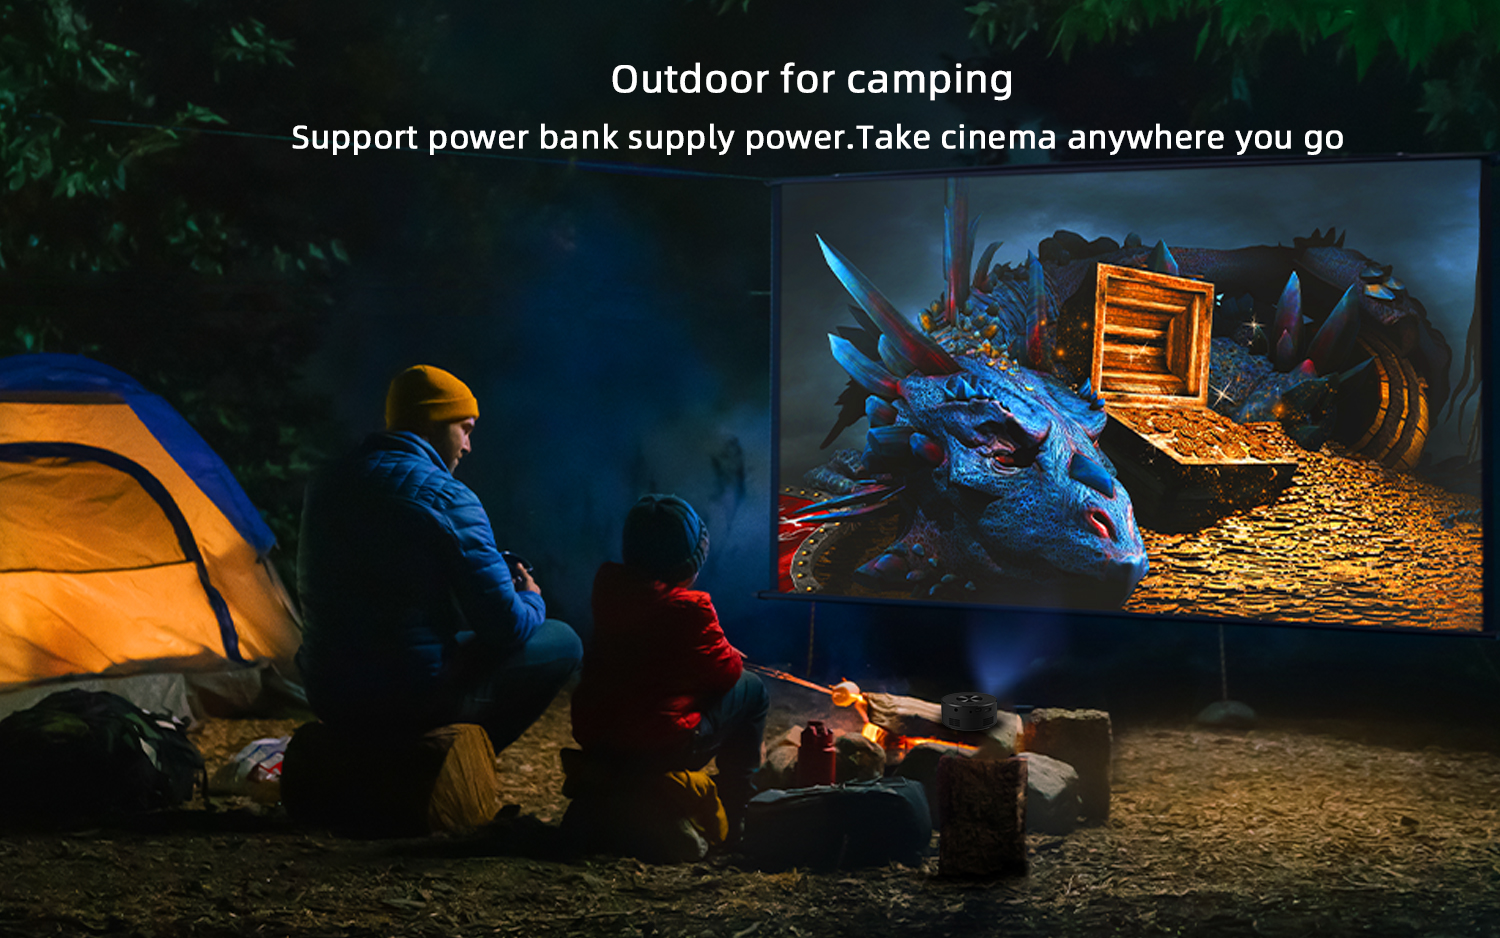 Bakeey VP2 Mini Projector Wired Mirroring Handheld Projection 320P 150 ANSI Lux Portable Cinema EU Plug